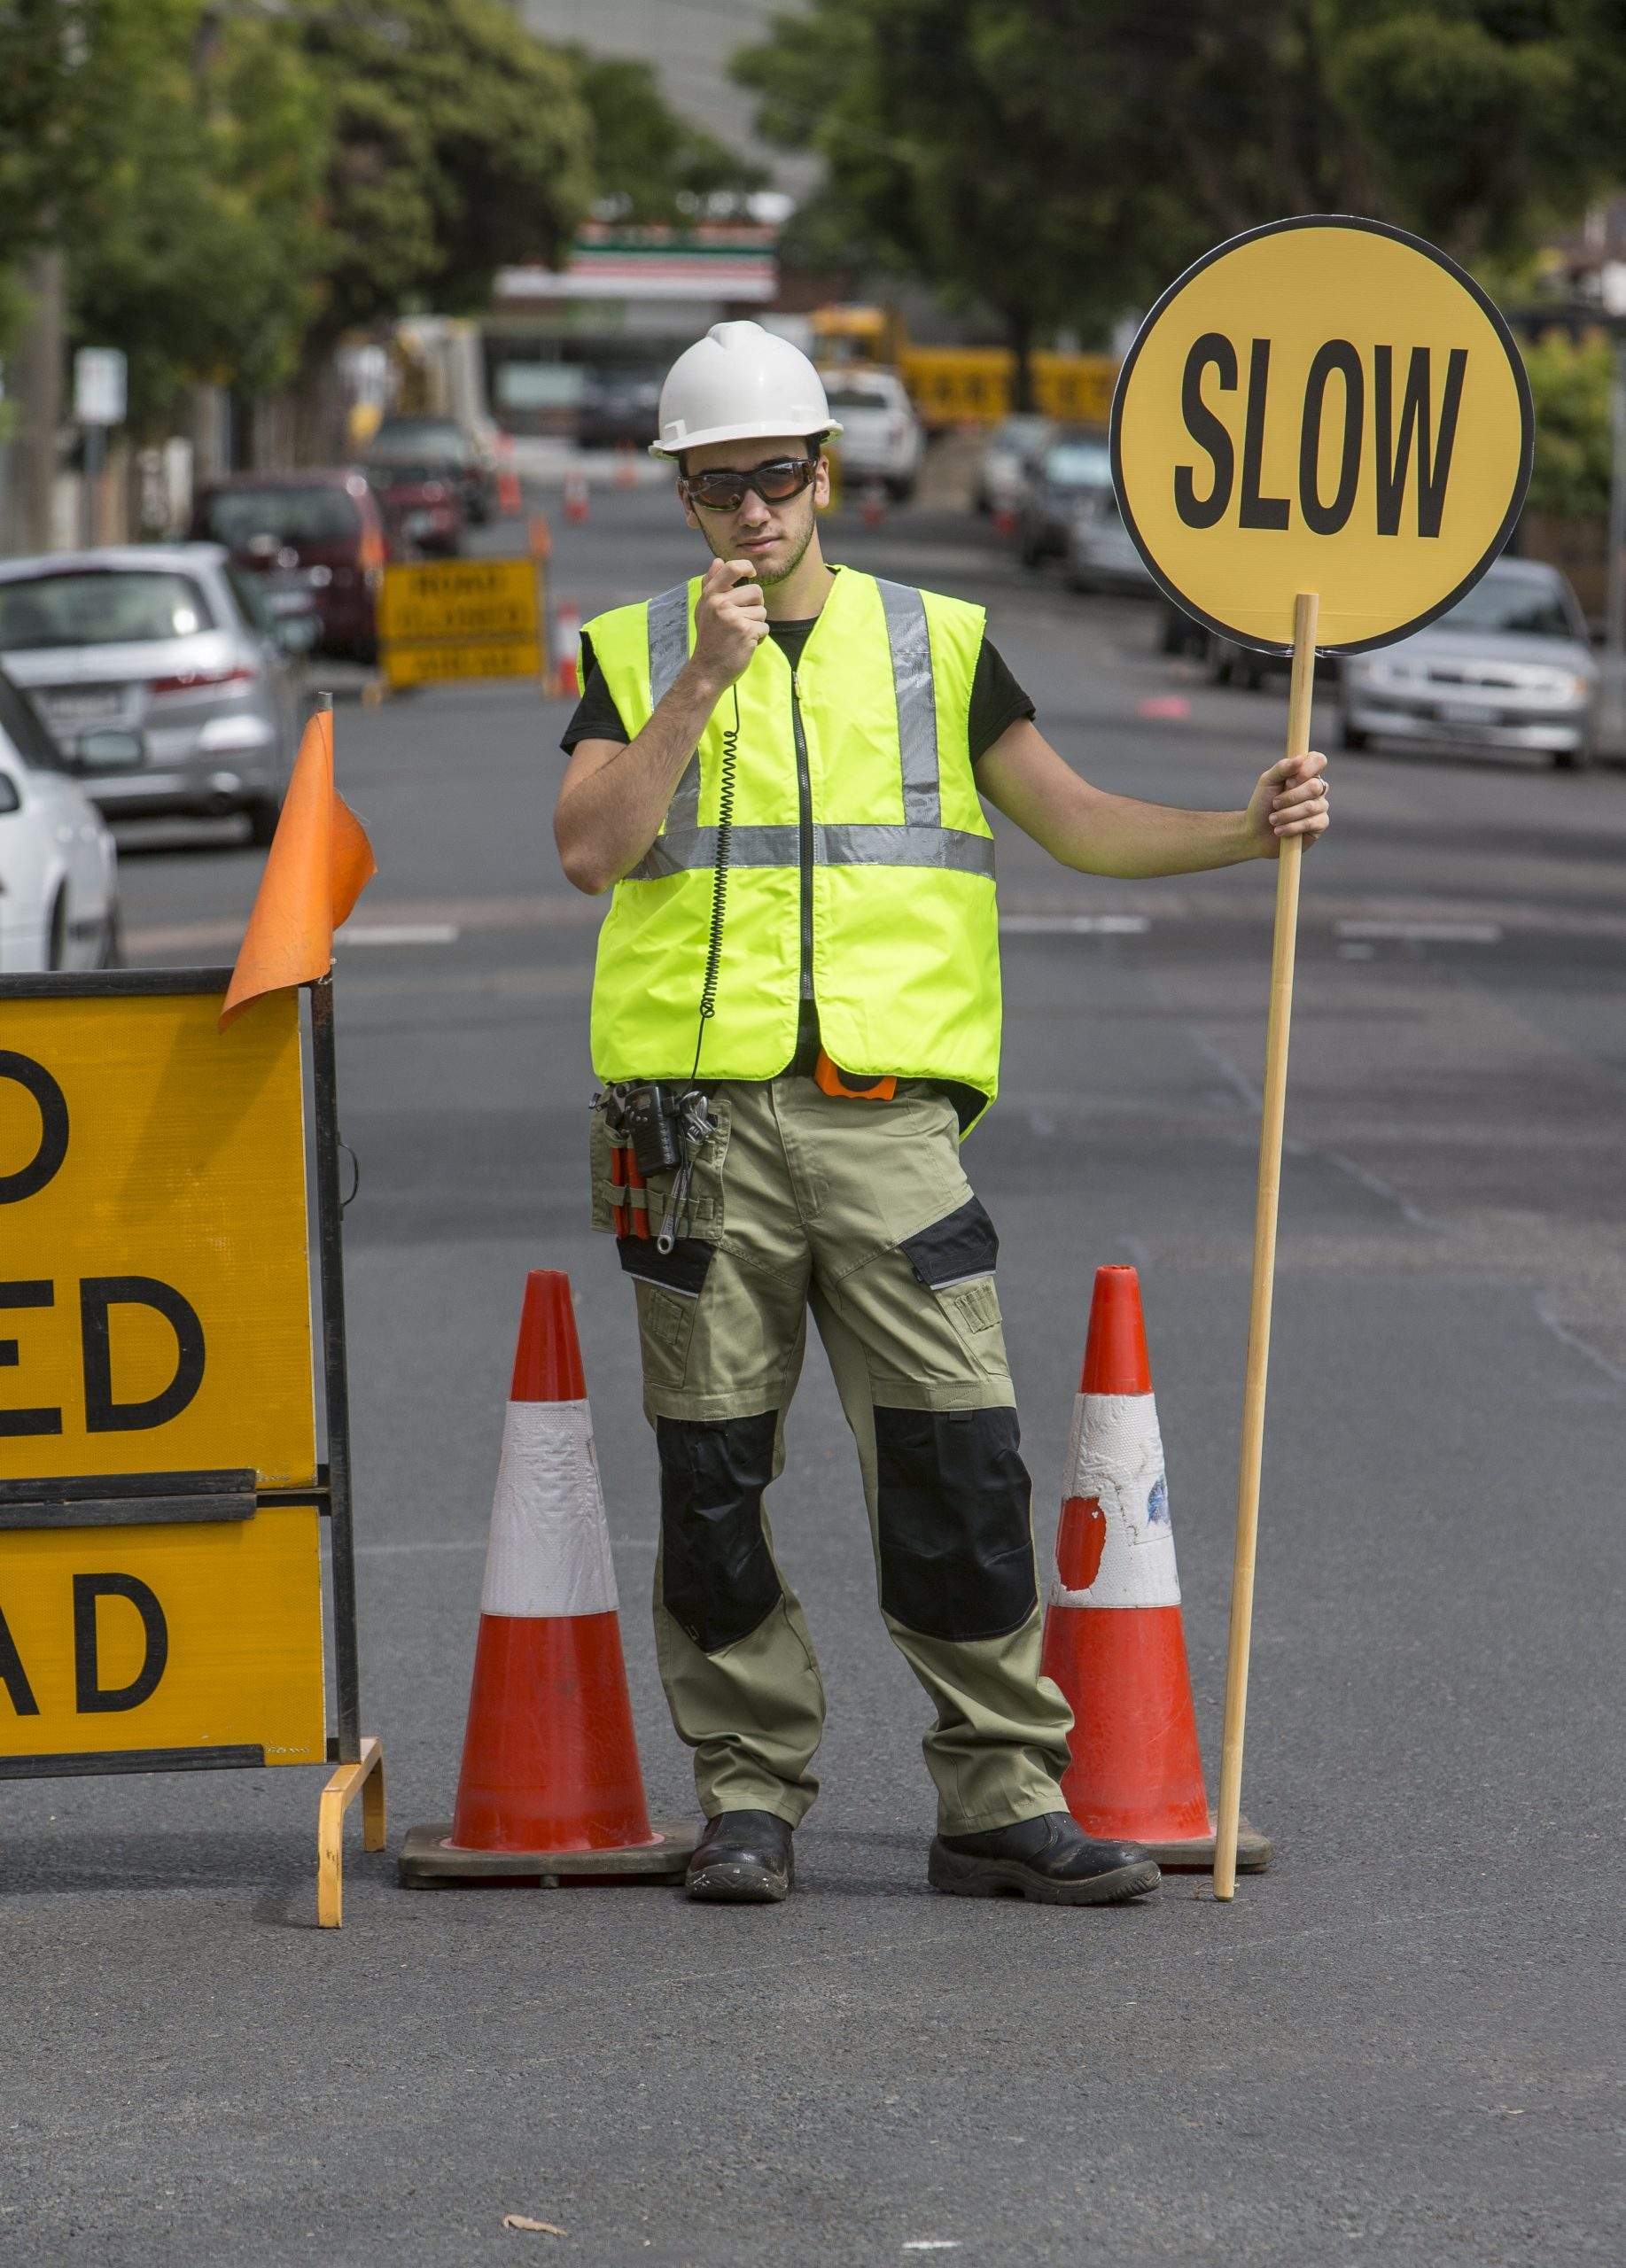 Traffic controller talking to radio and holding slow sign